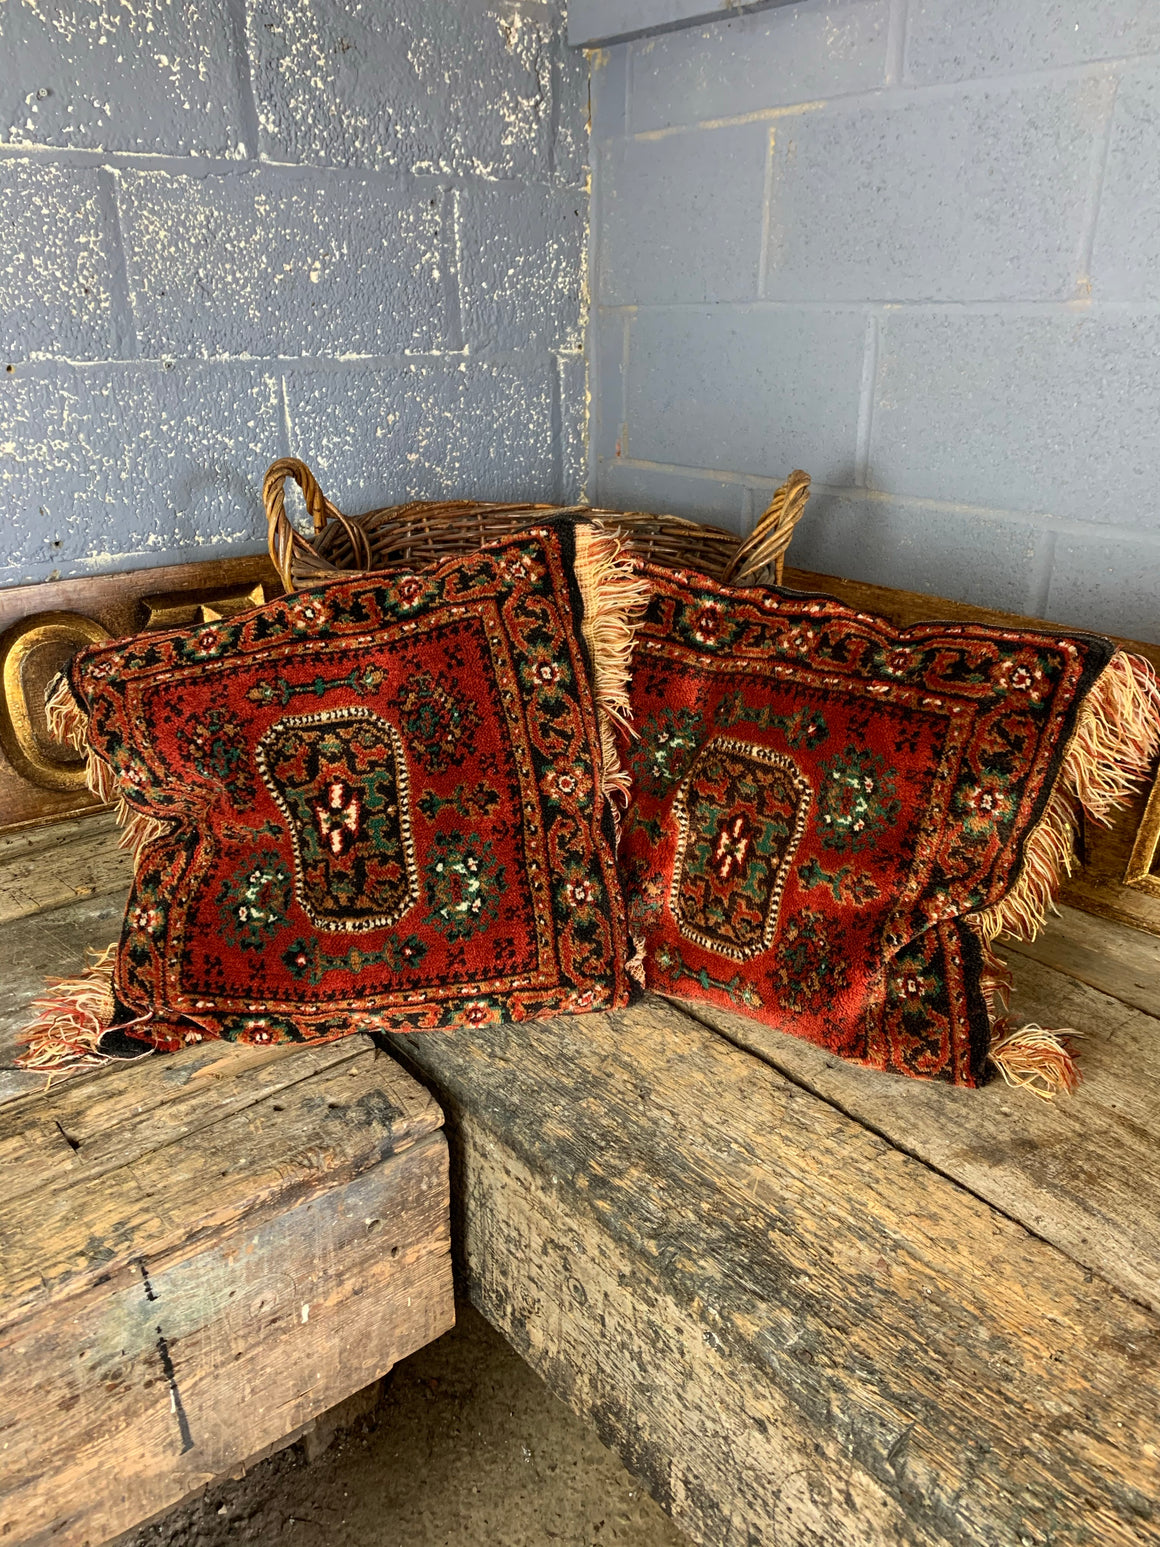 A large red ground Persian carpet cushion - 50cm